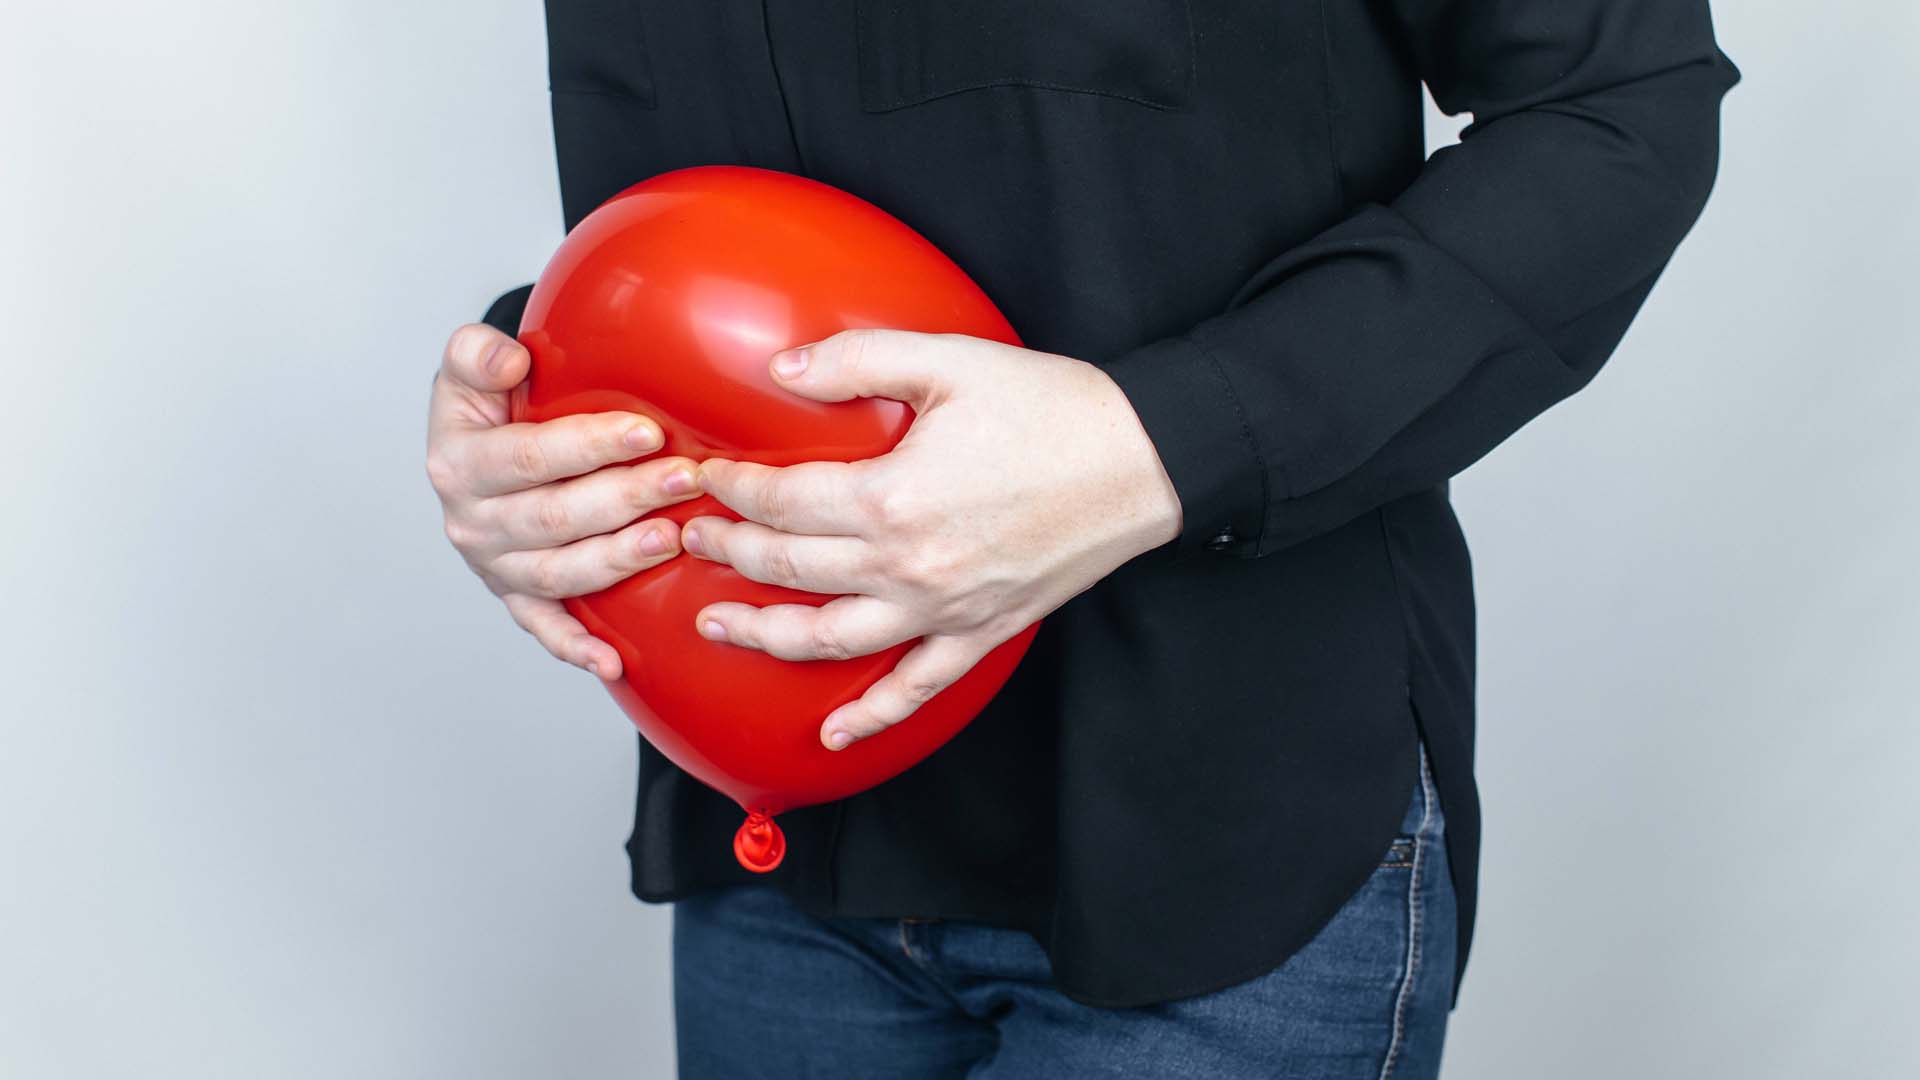 A man with an inflated balloon against his stomach